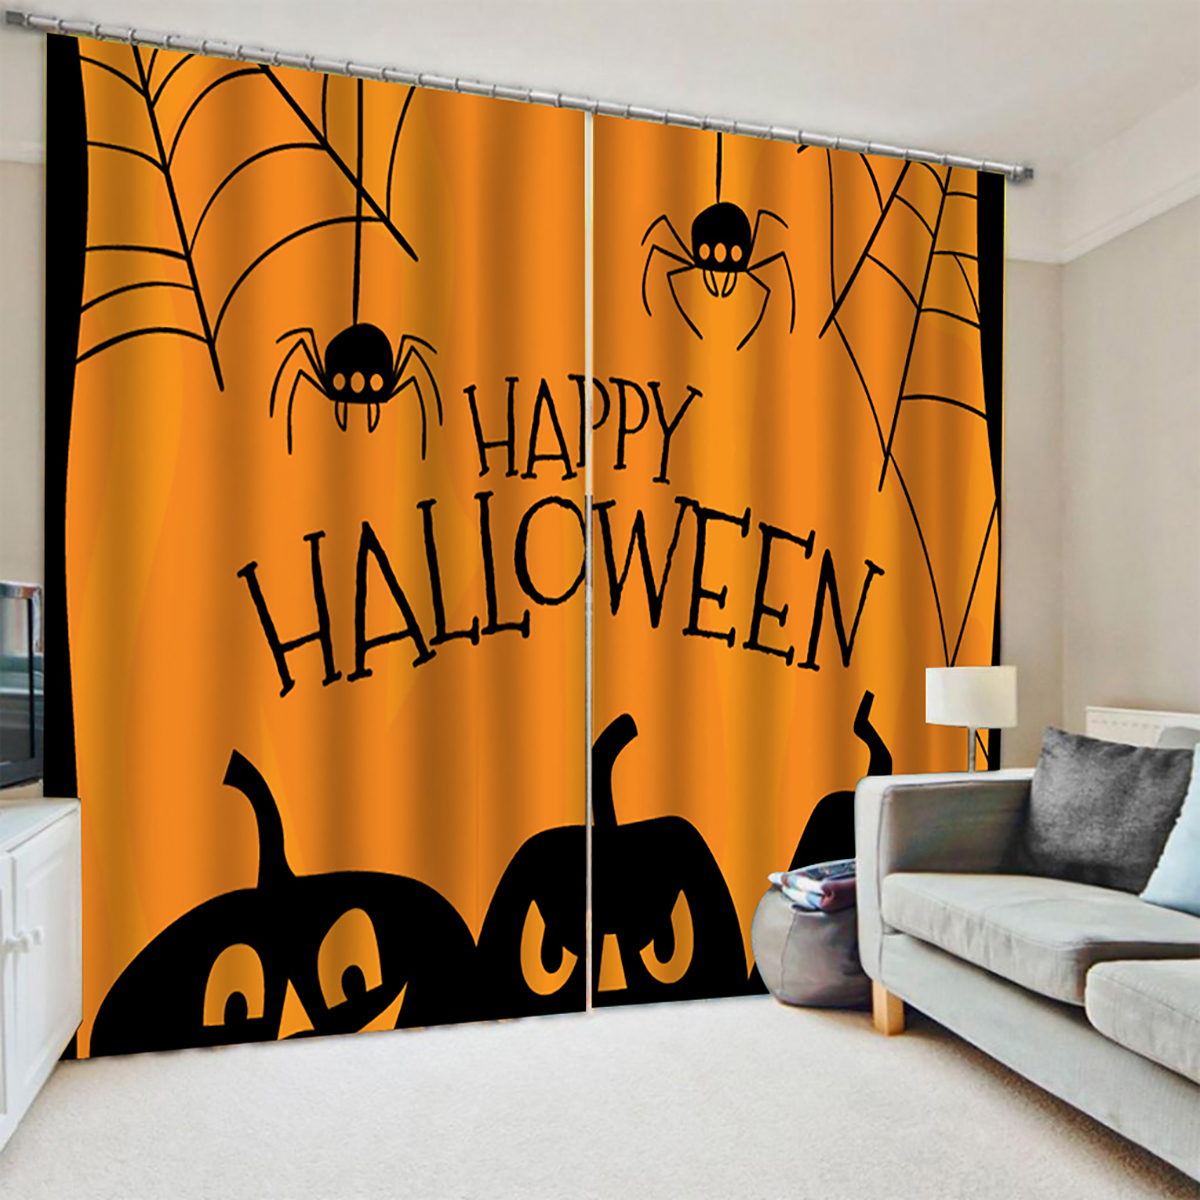 132160cm-Blackout-Window-Curtains-Halloween-Printed-Curtains-for-Living-Room-Festival-Decoration-1788701-3